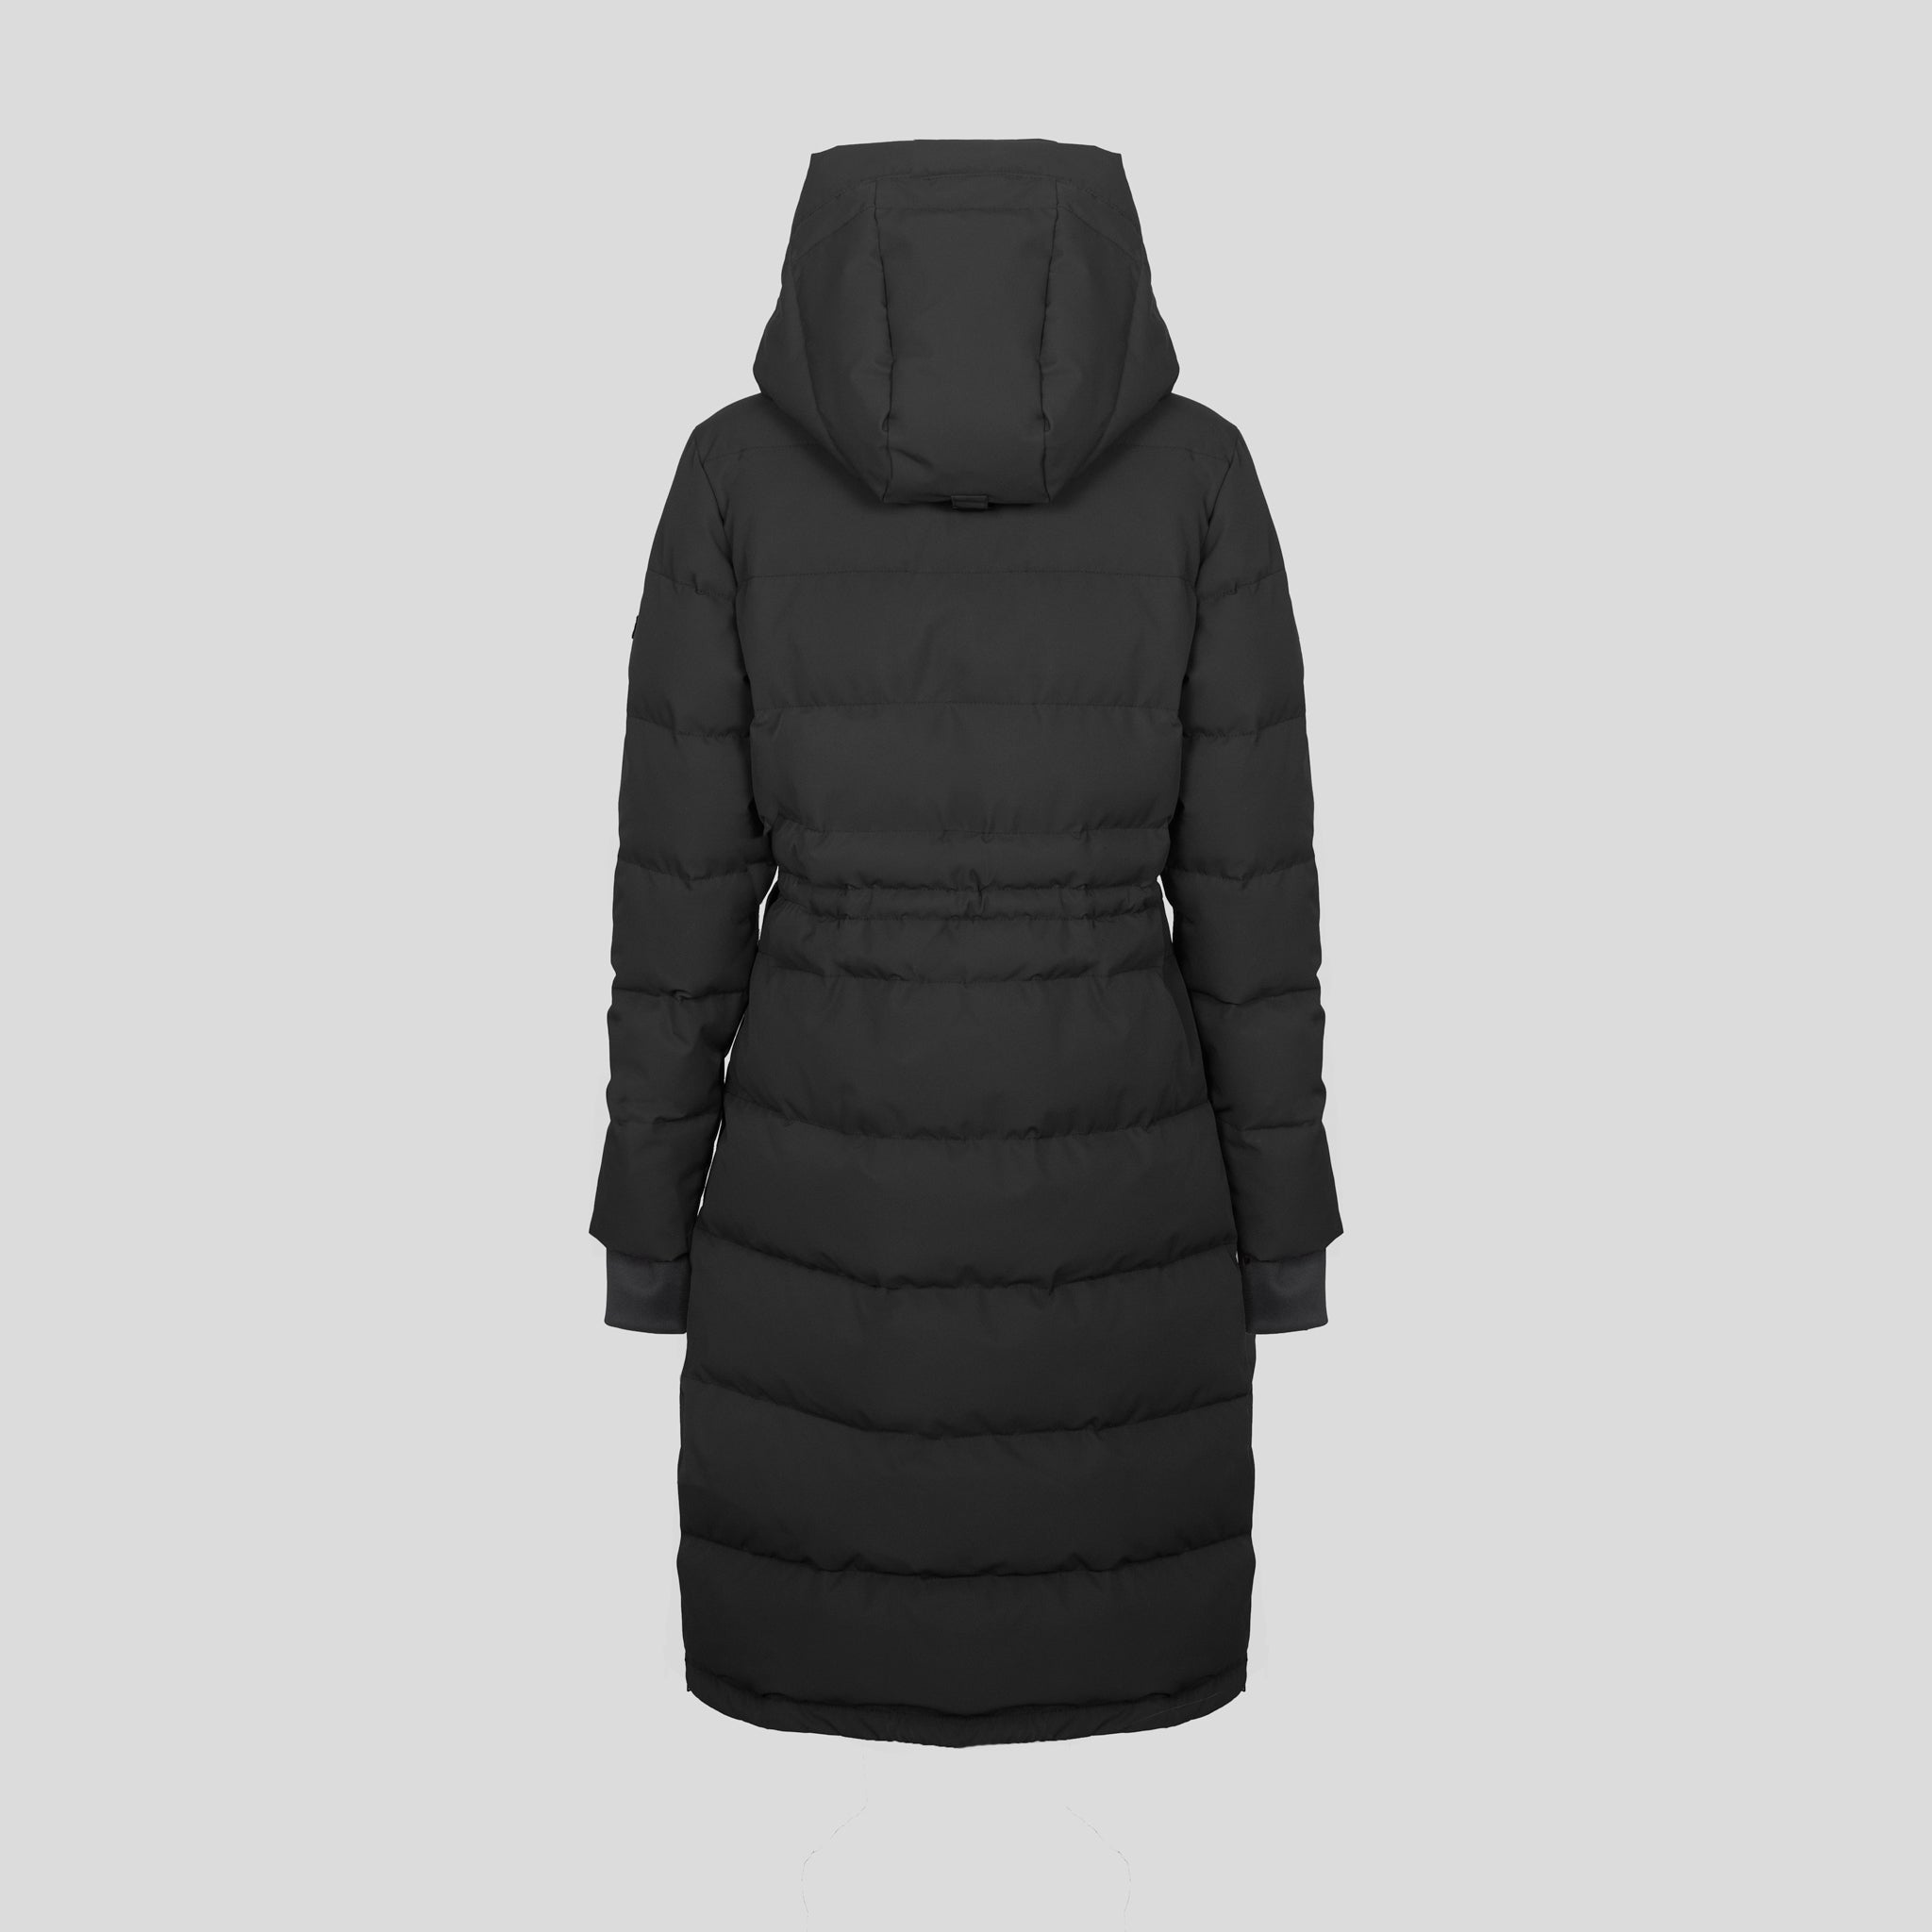 Where to Buy Winter Coats for Every Budget - YesMissy